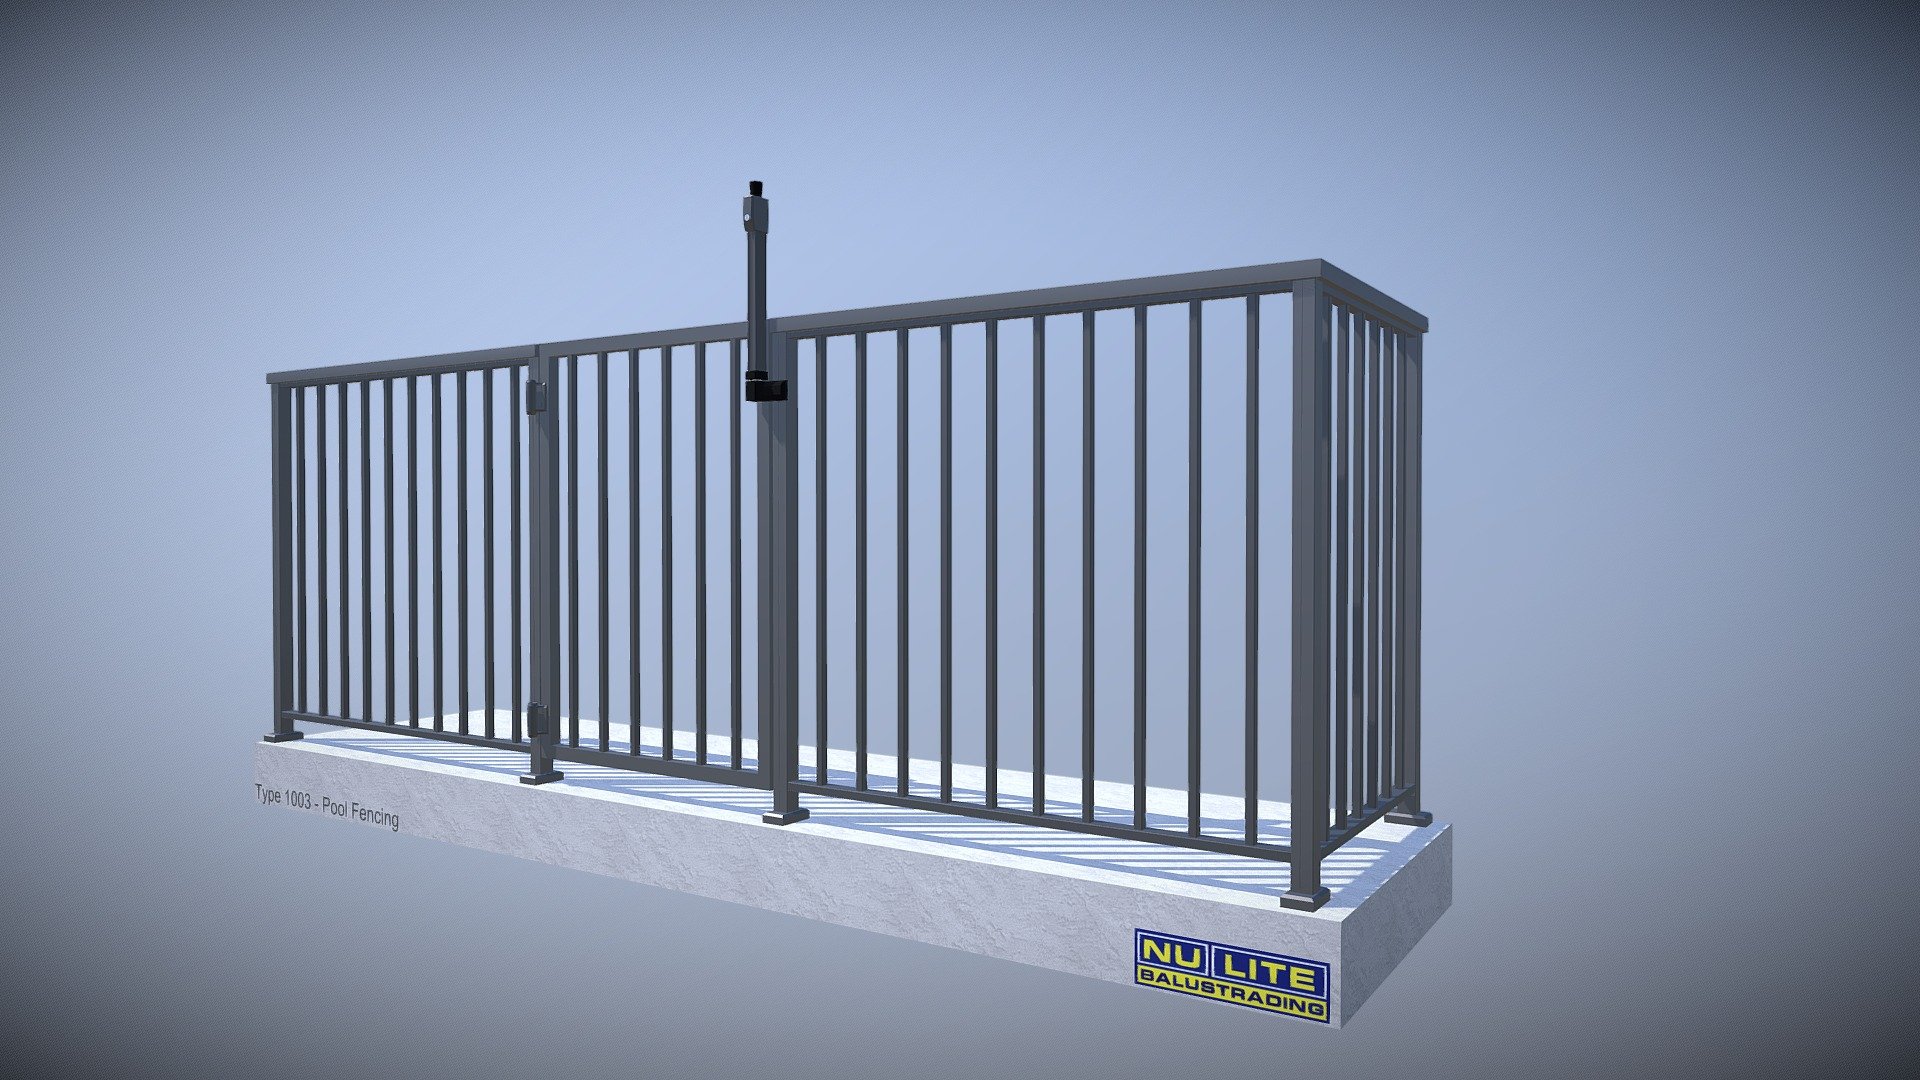 Nu-Lite Type 1003 - Pool Fencing



Fully Framed 20 x 20 Square Balusters

Powder Coated Aluminium

choice of handrails ( refer website)

Max Post spacing Nom 1500mm

Standard Height for Pool Fencing 1200mm FFL

Installation – Timber, Concrete, Steel

Colours: Standard Powder Coat Range

Visit our website at https://nu-lite.com.au for more info.

Note: All Nu-Lite Balustrading and Pool Fencing is custom made and installed by Nu-Lite.
 - Type 1003 Pool Fencing - 3D model by Nu-Lite Balustrading (@nulite) 3d model